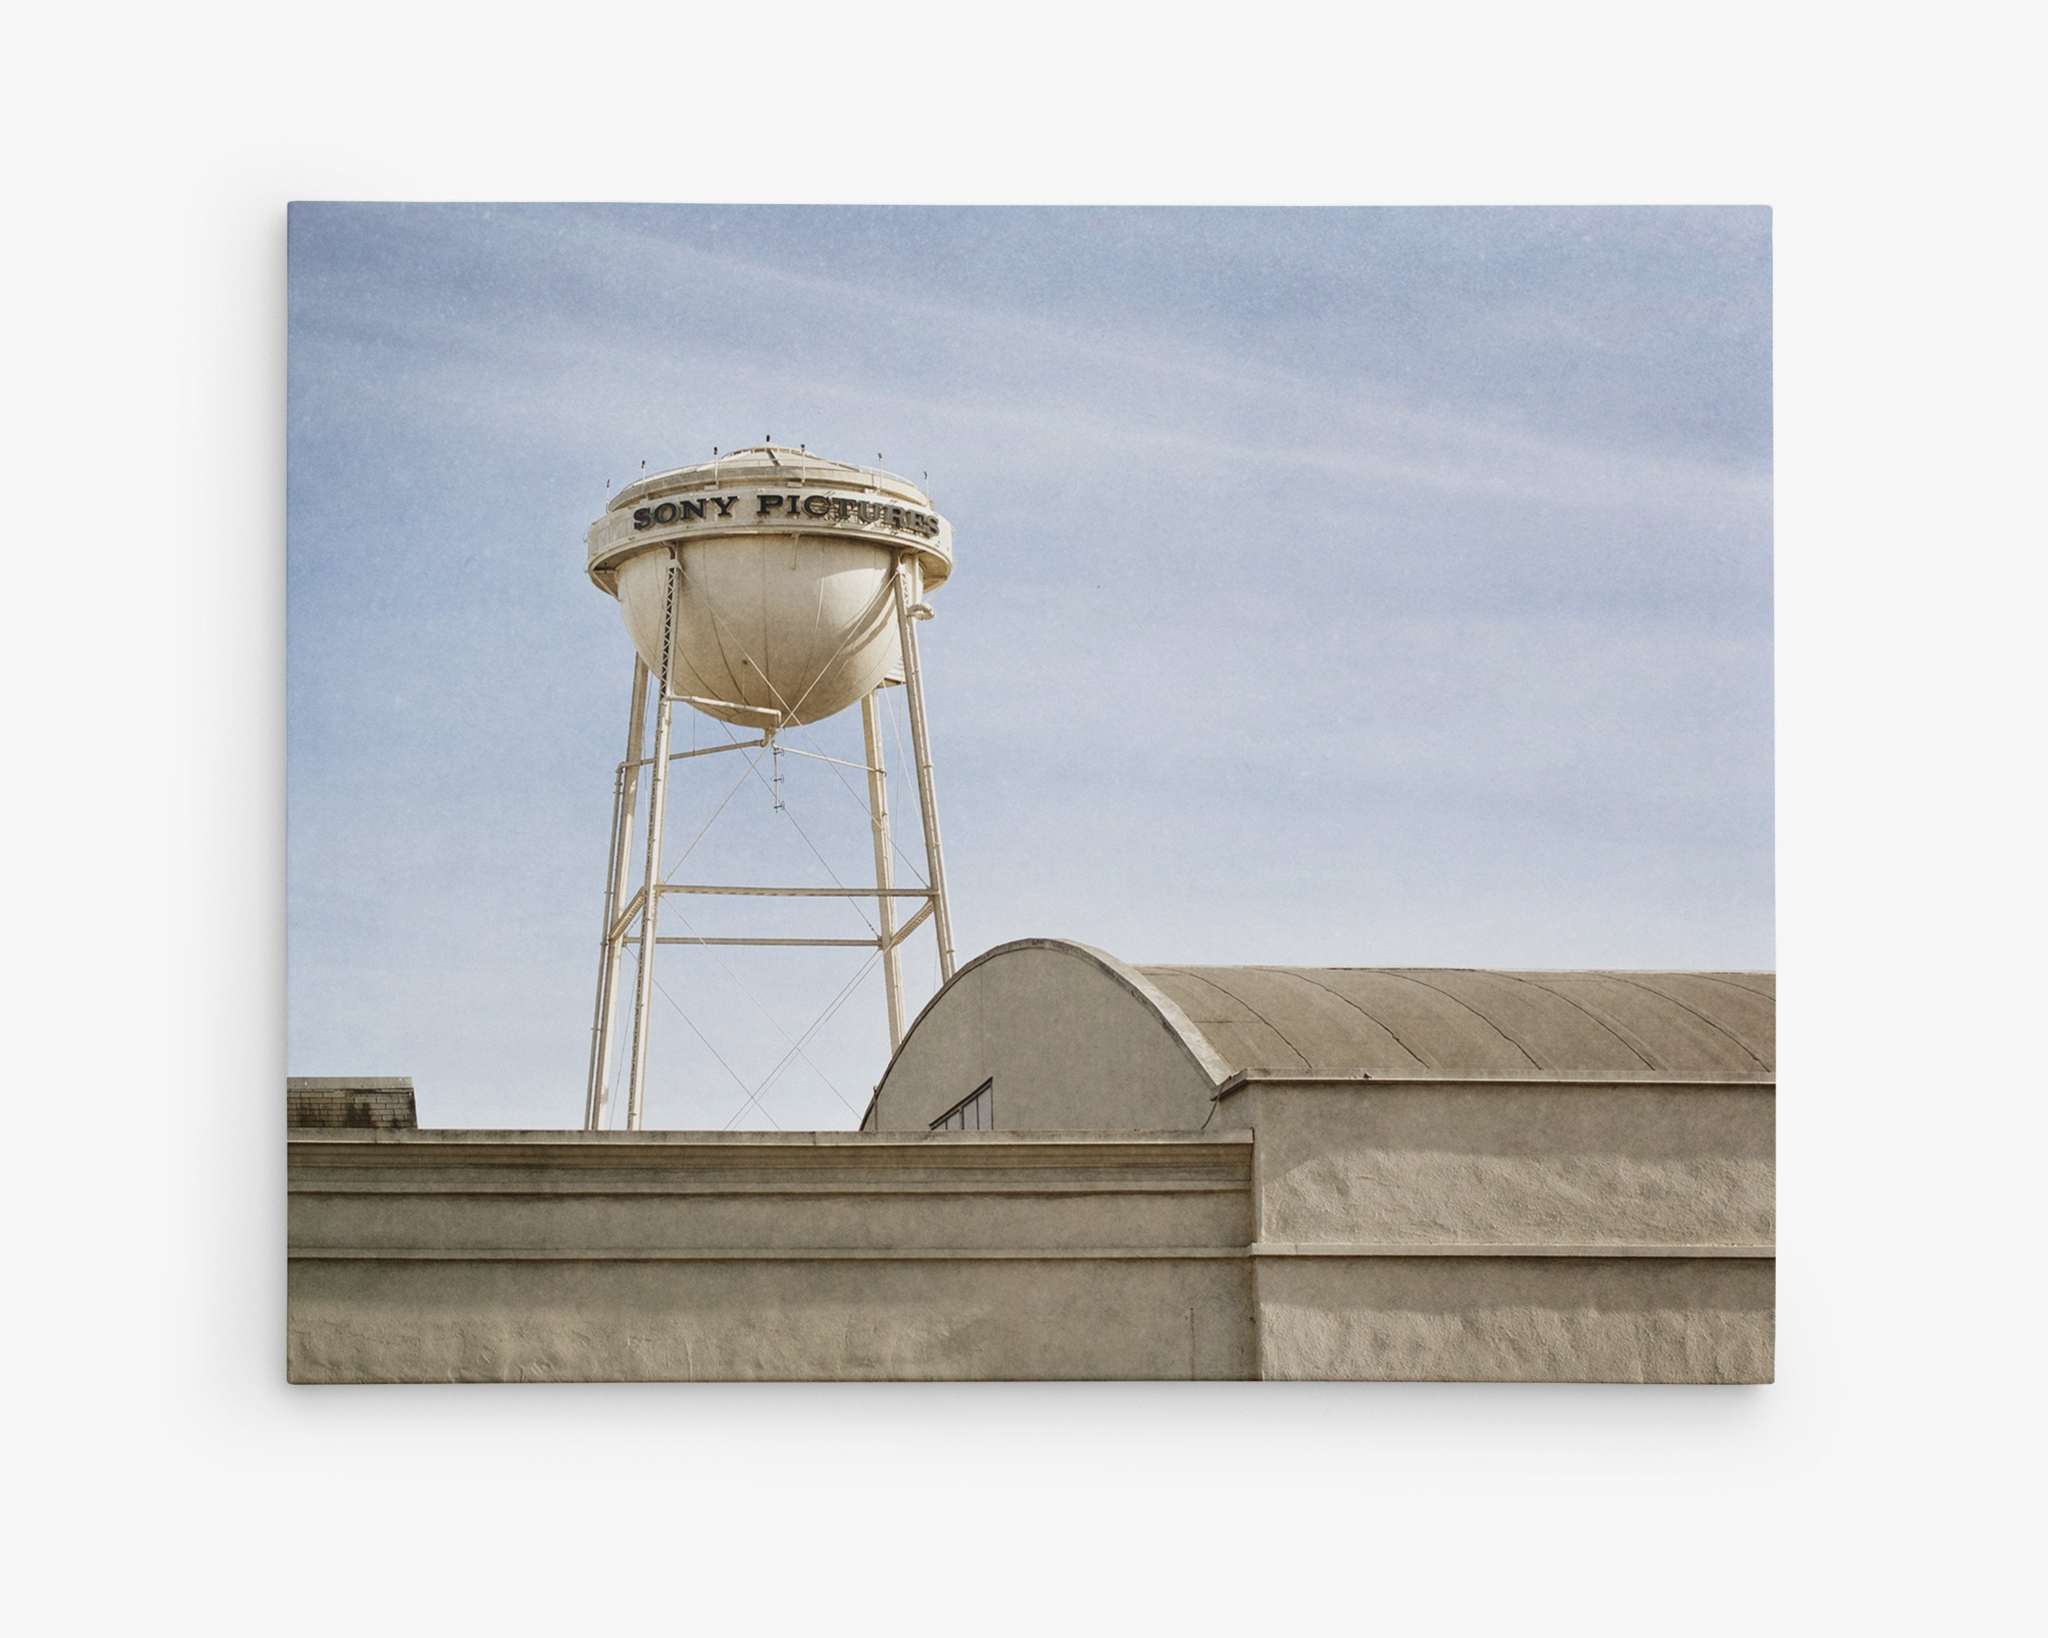 A tall water tower labeled &quot;SONY PICTURES&quot; rises above the surrounding buildings. Situated in an industrial area with lightly clouded skies, it resembles a Los Angeles Sony Pictures Studio Wall Art, &#39;Sony Lot&#39; by Offley Green. The light gray, industrial-looking buildings in the foreground complete this cinematic view of Sony Studios.